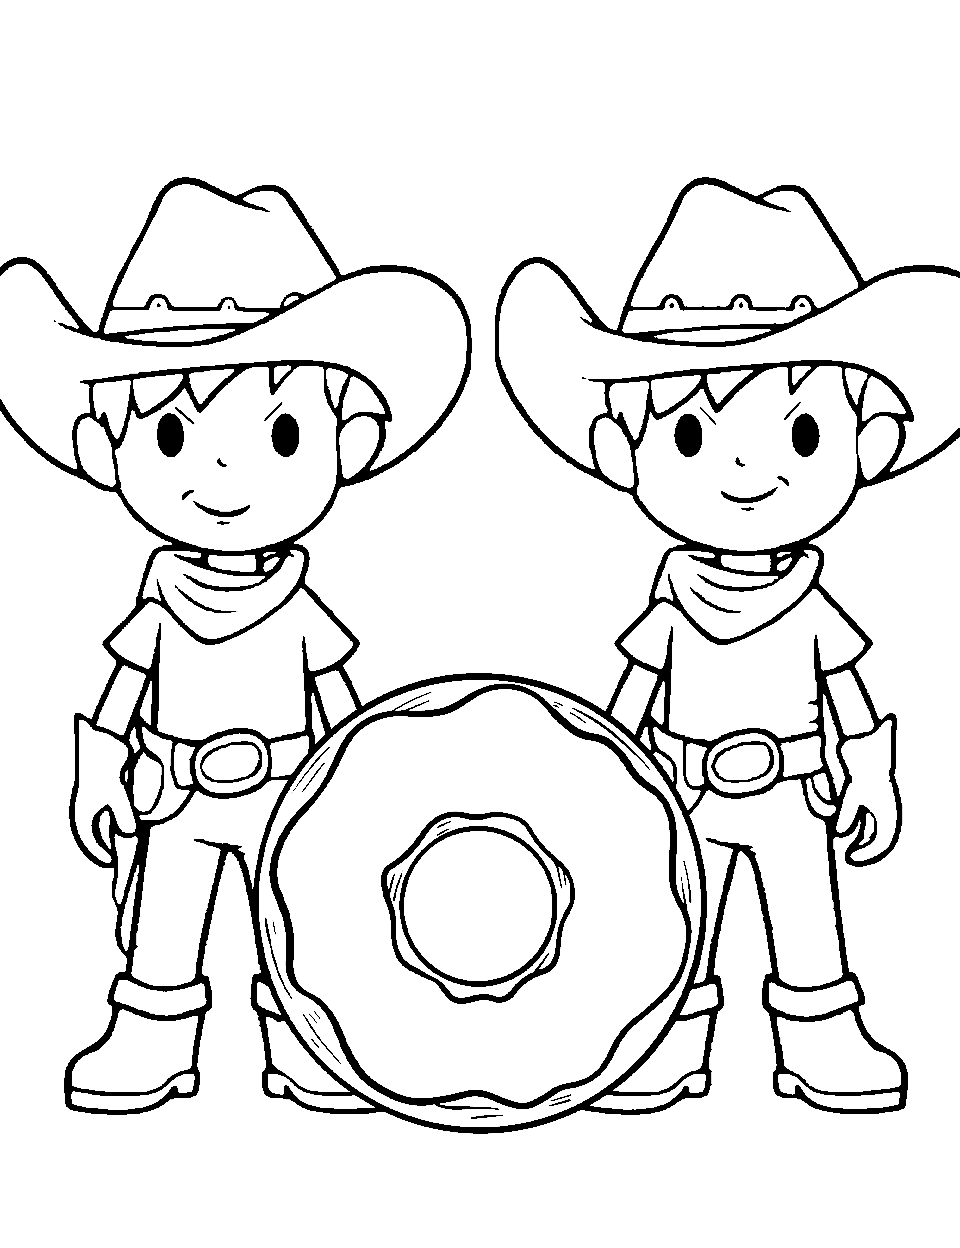 Wild West Donut Duel Coloring Page - Cowboys in the Wild West, ready to have a duel for a big donut.